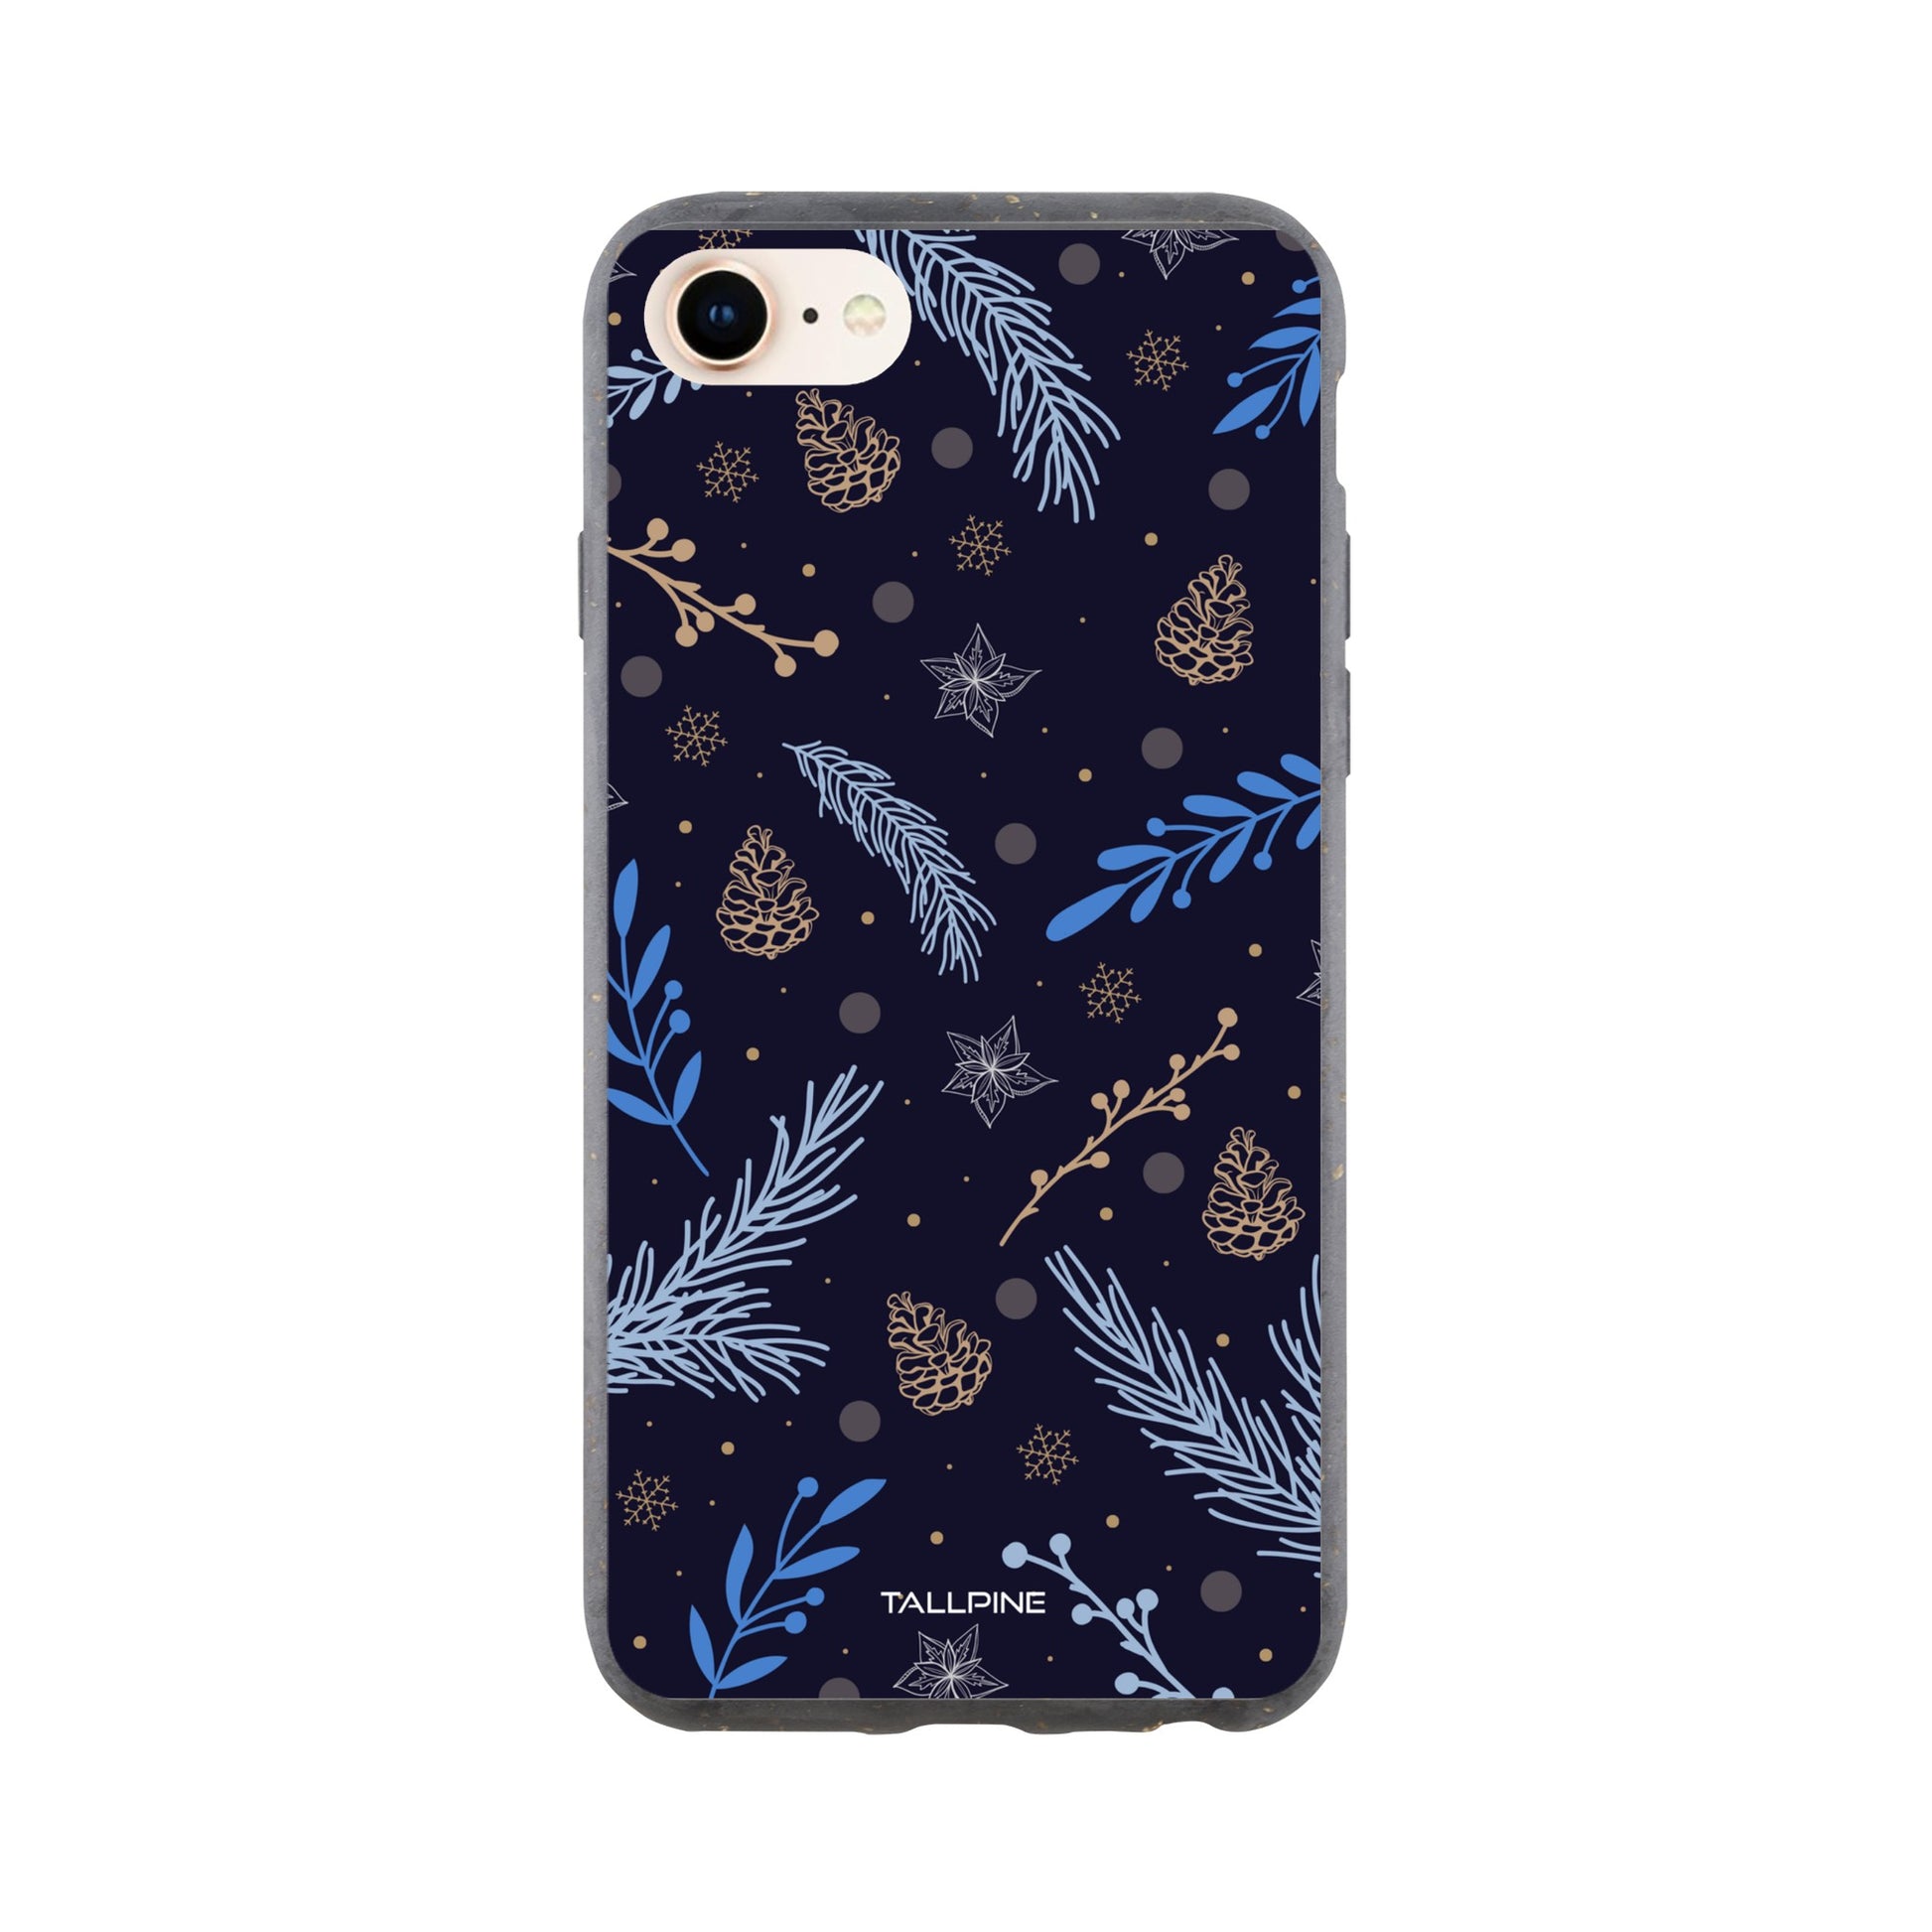 Arctic Dreams - Eco Case iPhone SE - Tallpine Cases | Sustainable and Eco-Friendly - Nature